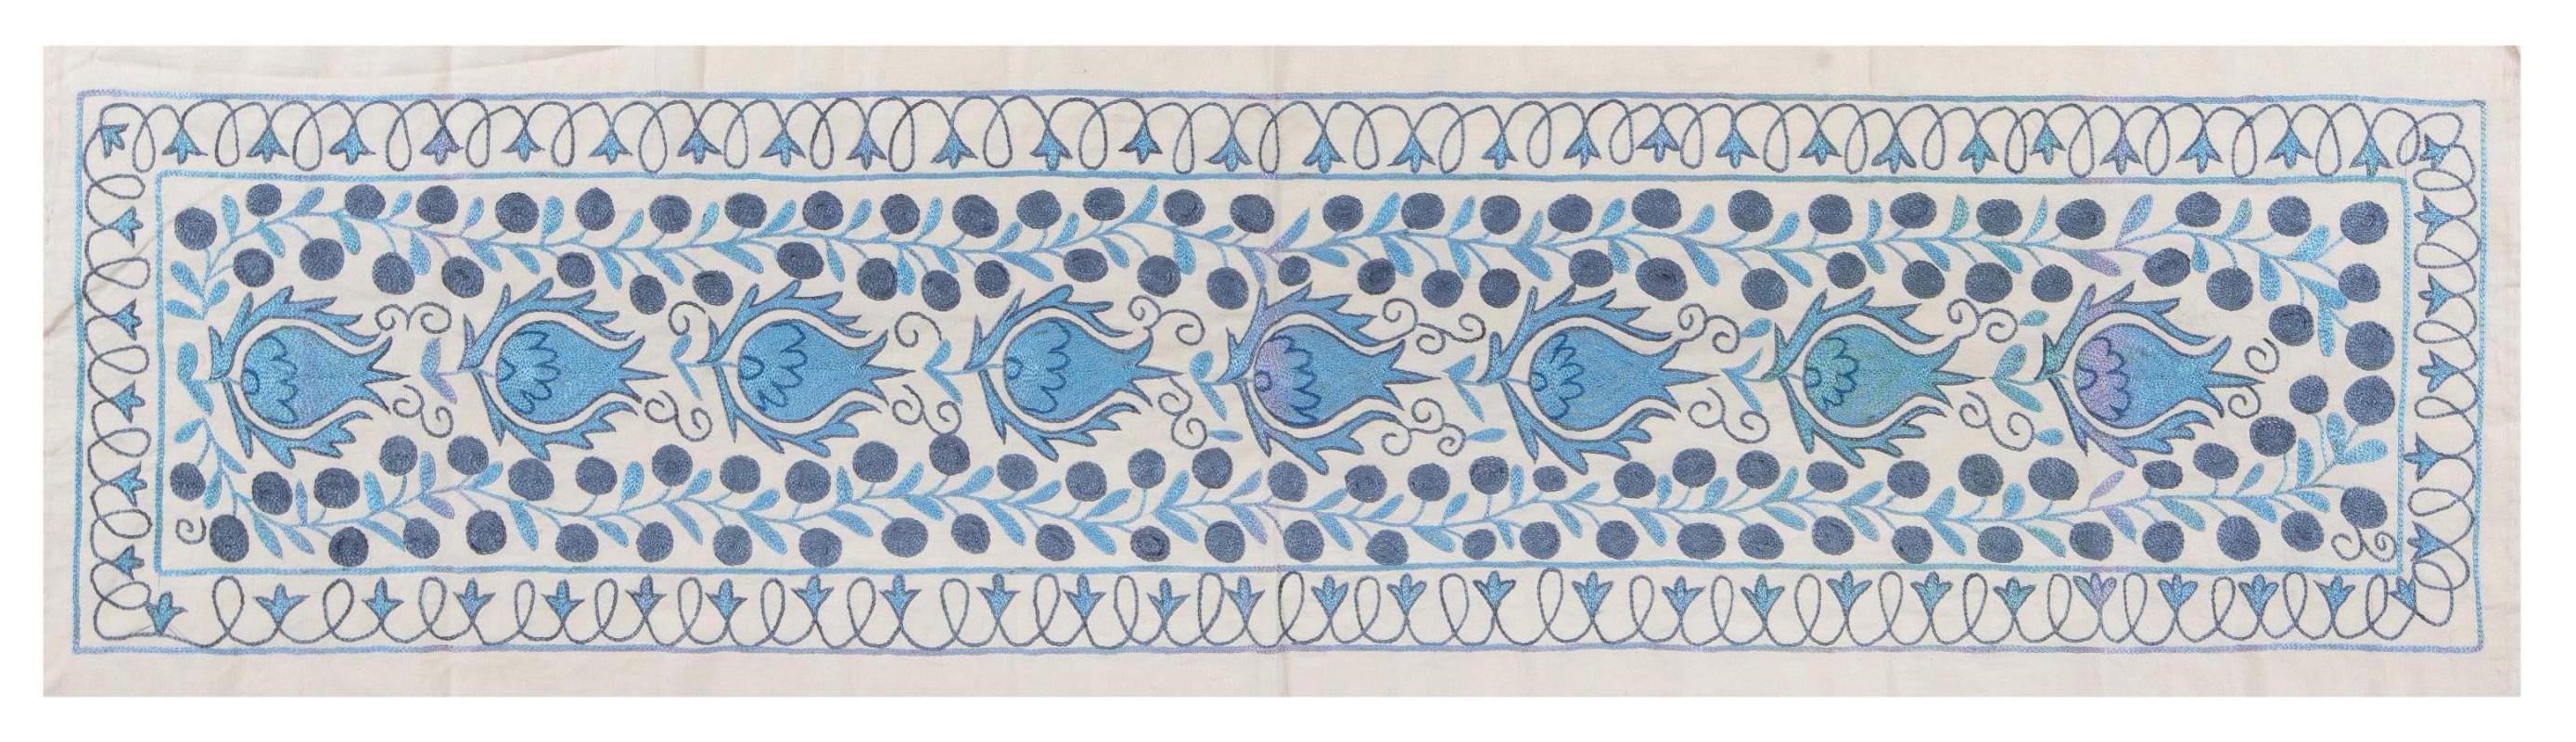 Contemporary 1.7x6.2 Ft Central Asian Suzani Textile. Embroidered Cotton & Silk Table Runner For Sale